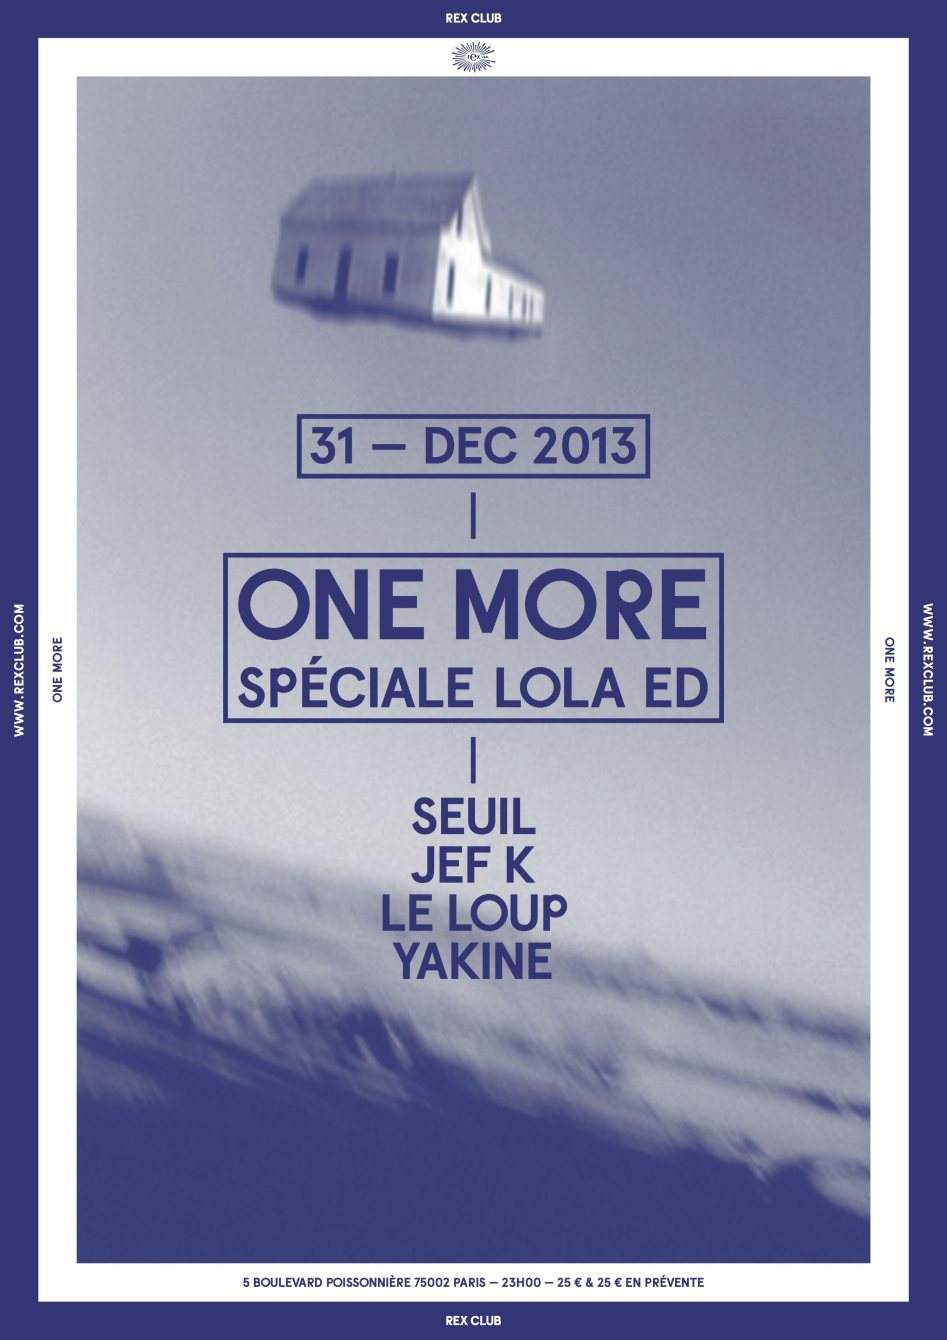 One More Spéciale Lola Ed: Seuil, Jef K, Le Loup, Yakine - フライヤー表